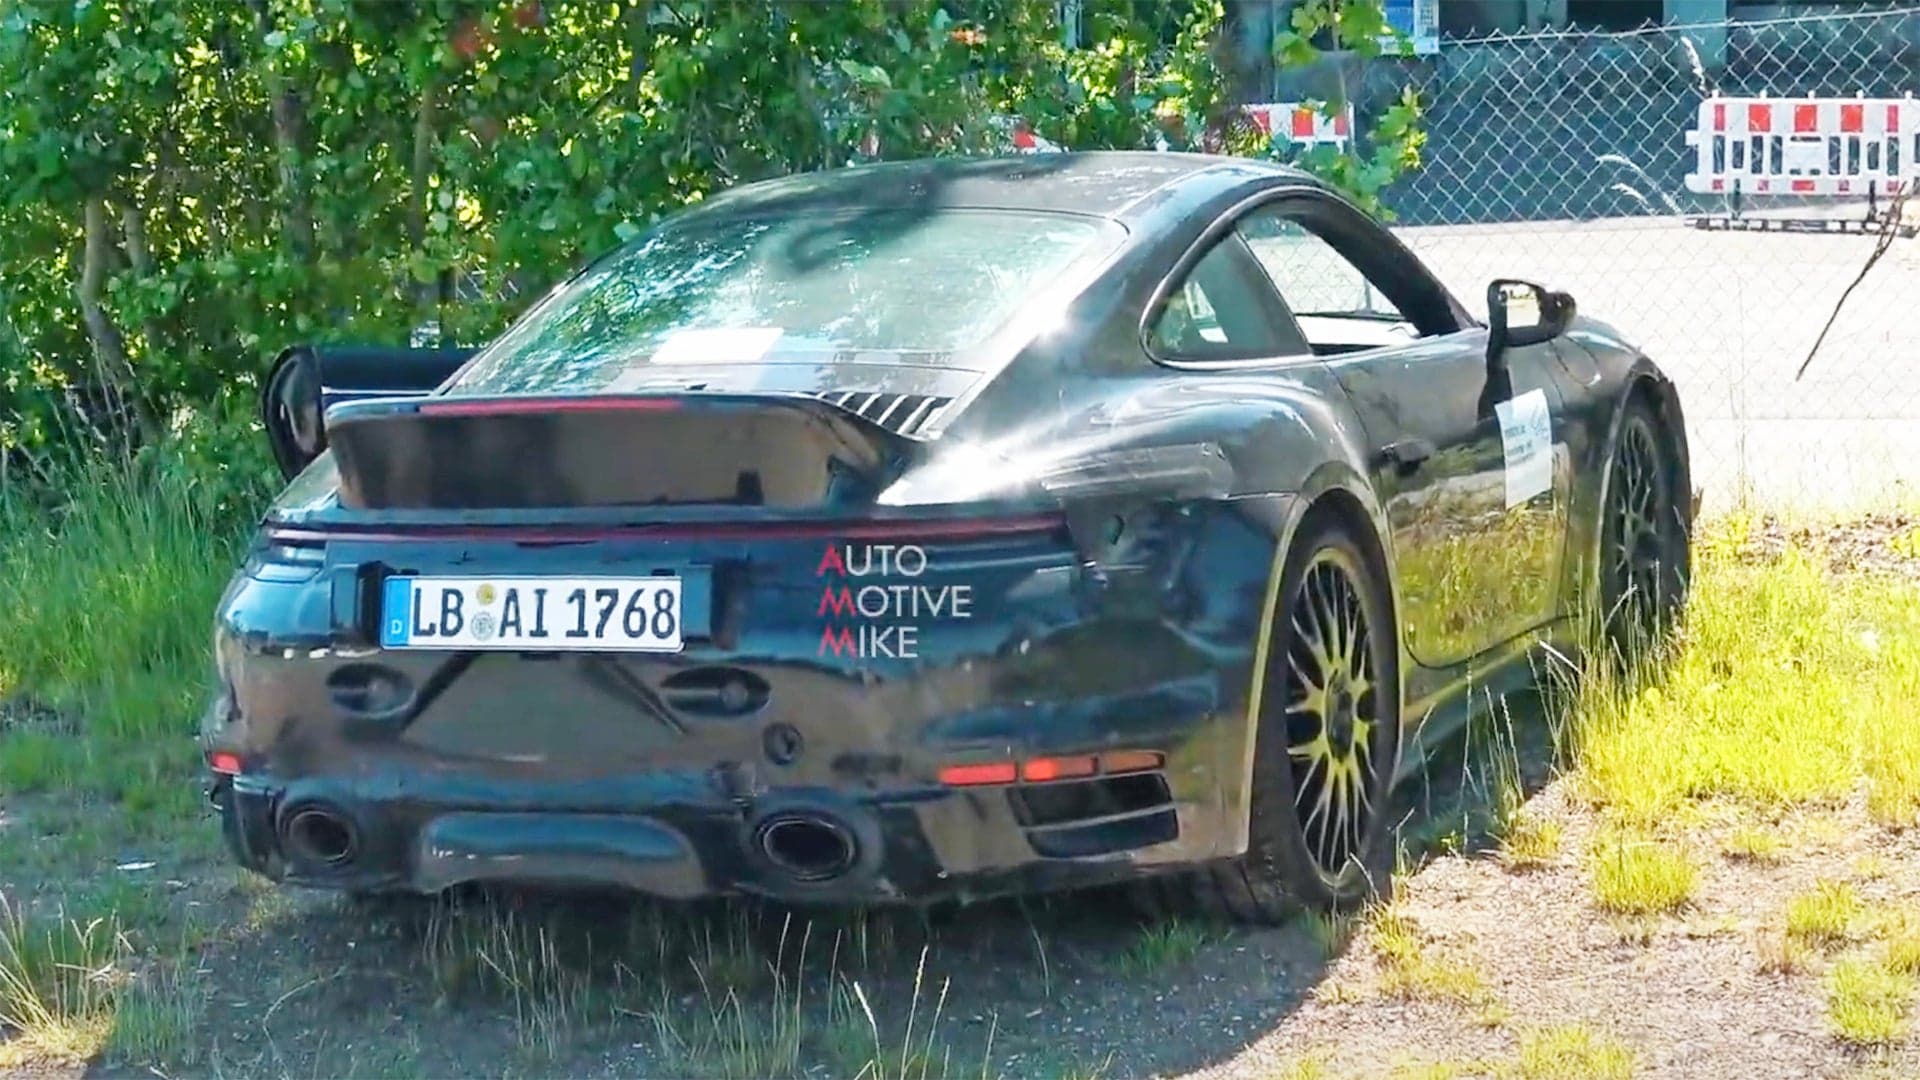 Throwback Porsche 911 with Ducktail Spoiler Spotted at the Nurburgring